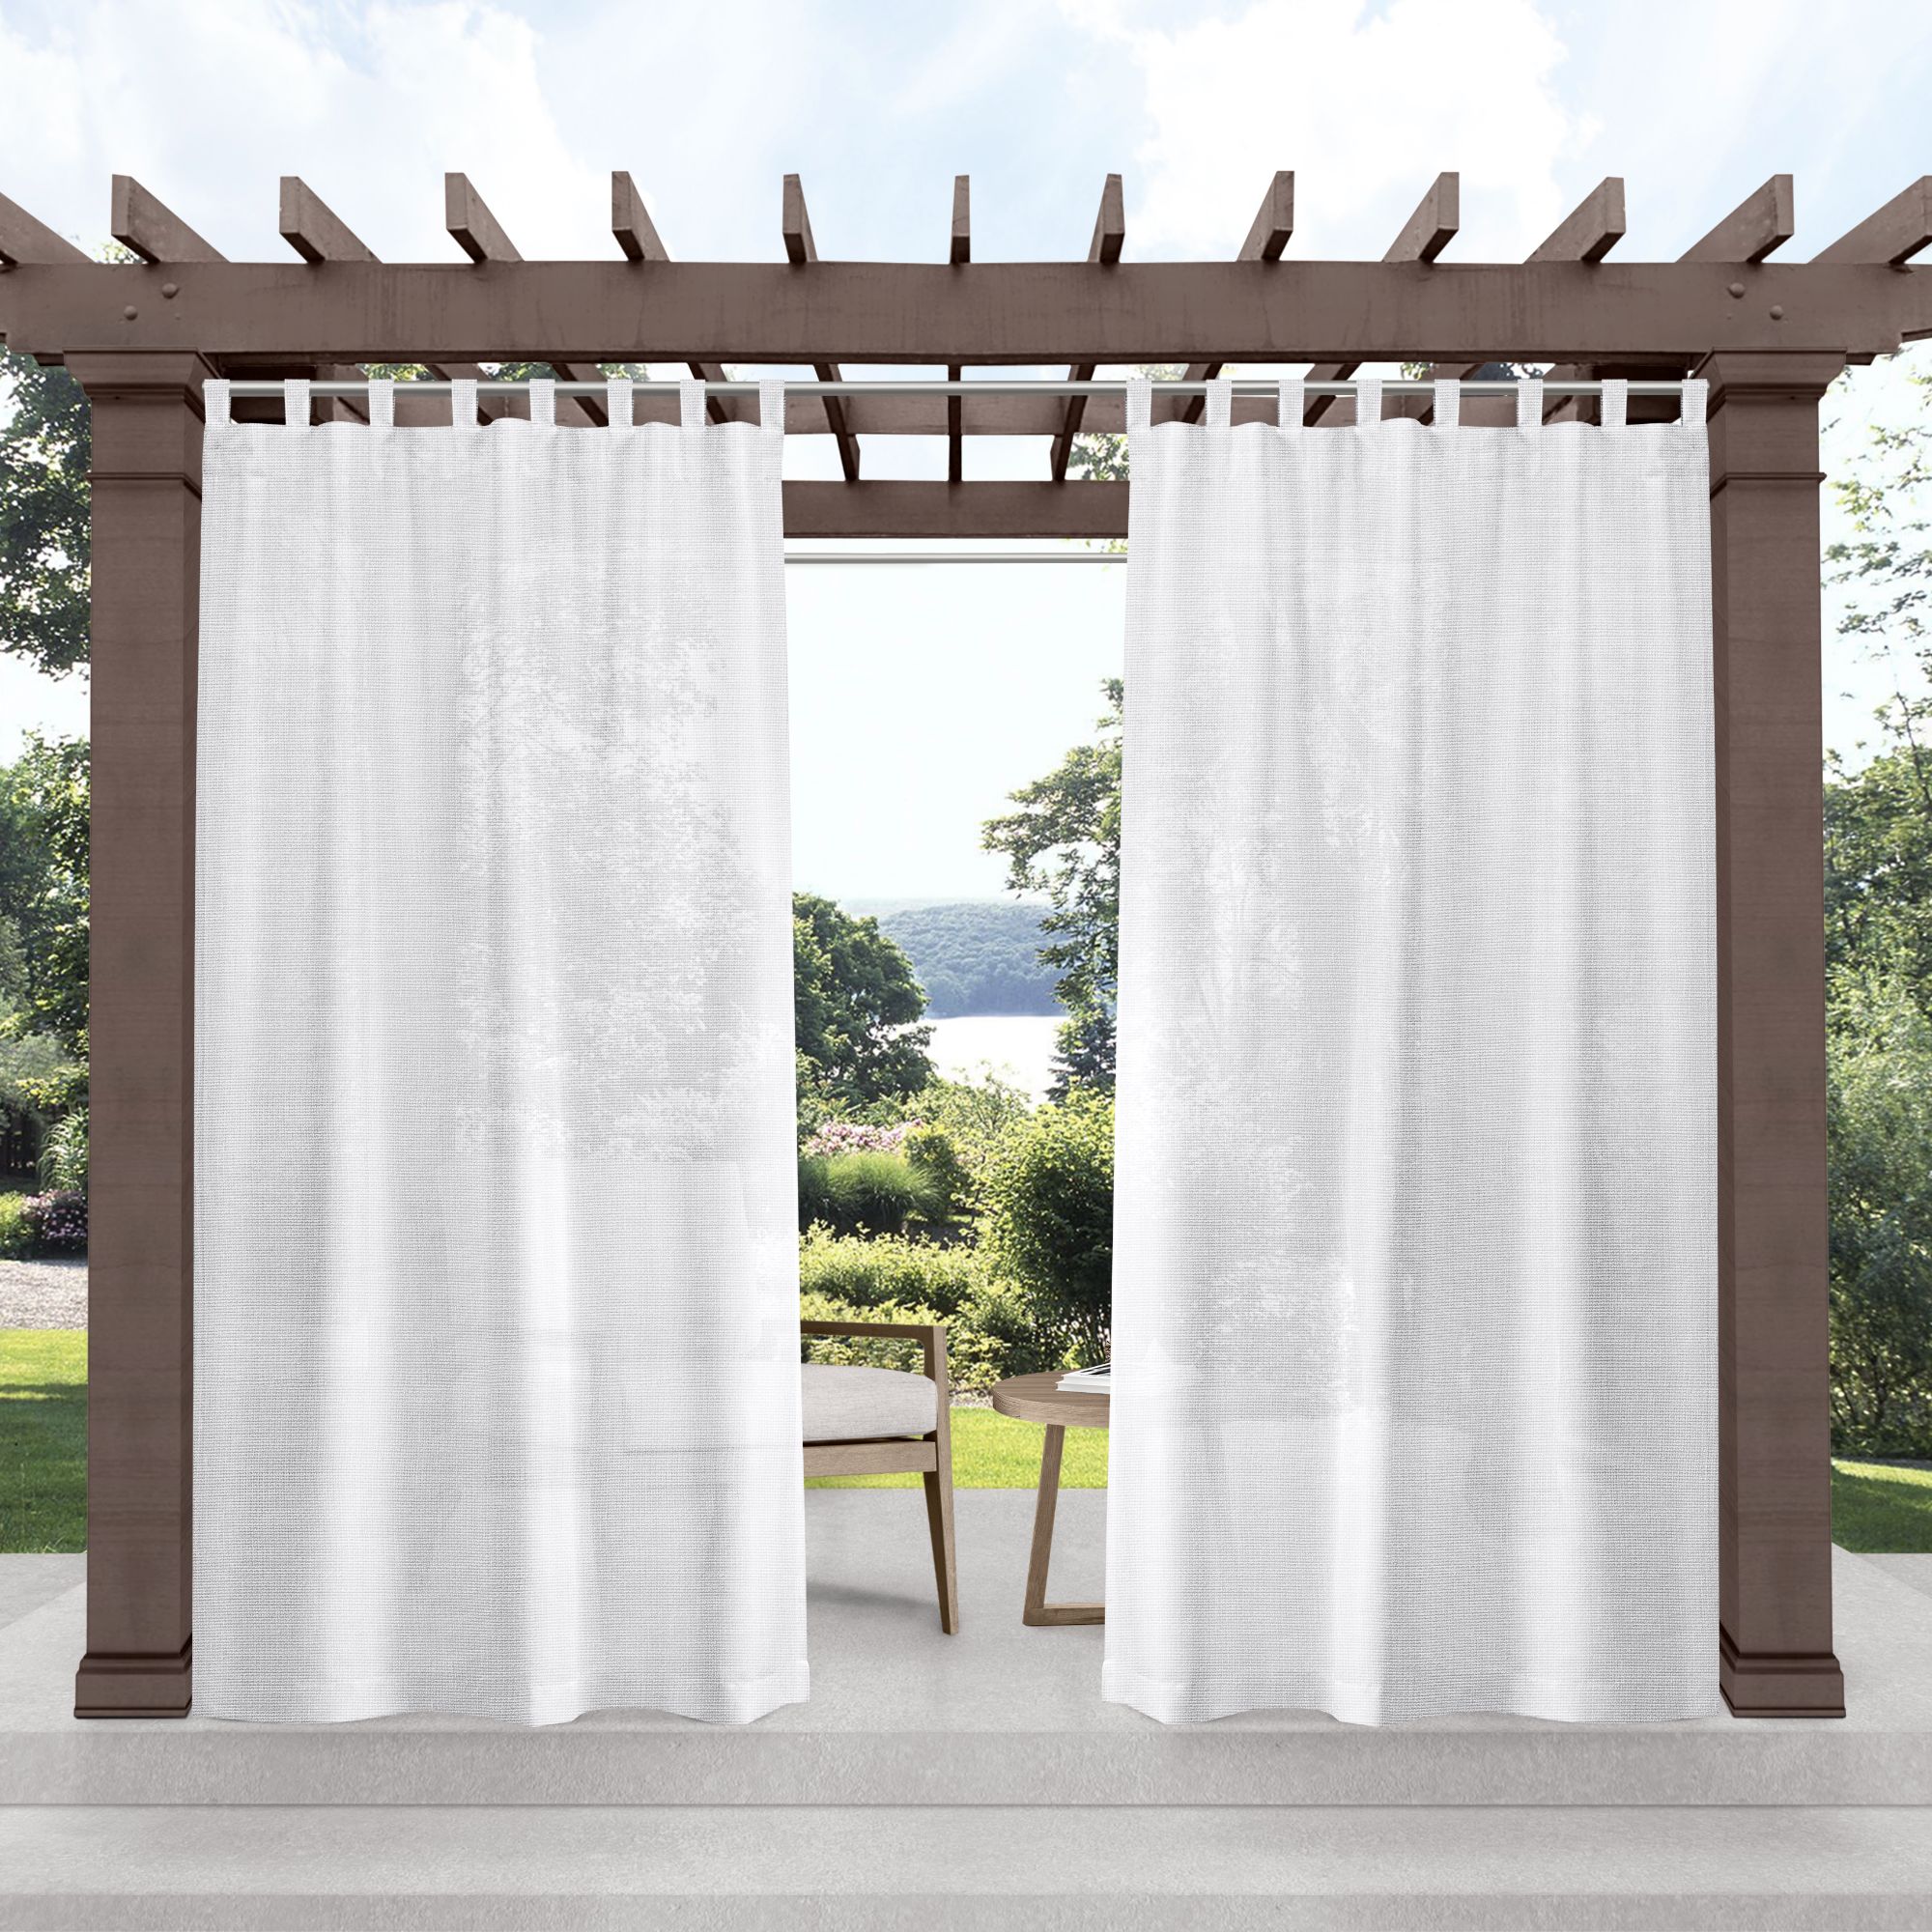 Exclusive Home Miami Semi-Sheer Indoor/Outdoor Hook-and-Loop Tab Top Curtain Panel Pair, 54"x84", Winter White - image 1 of 6